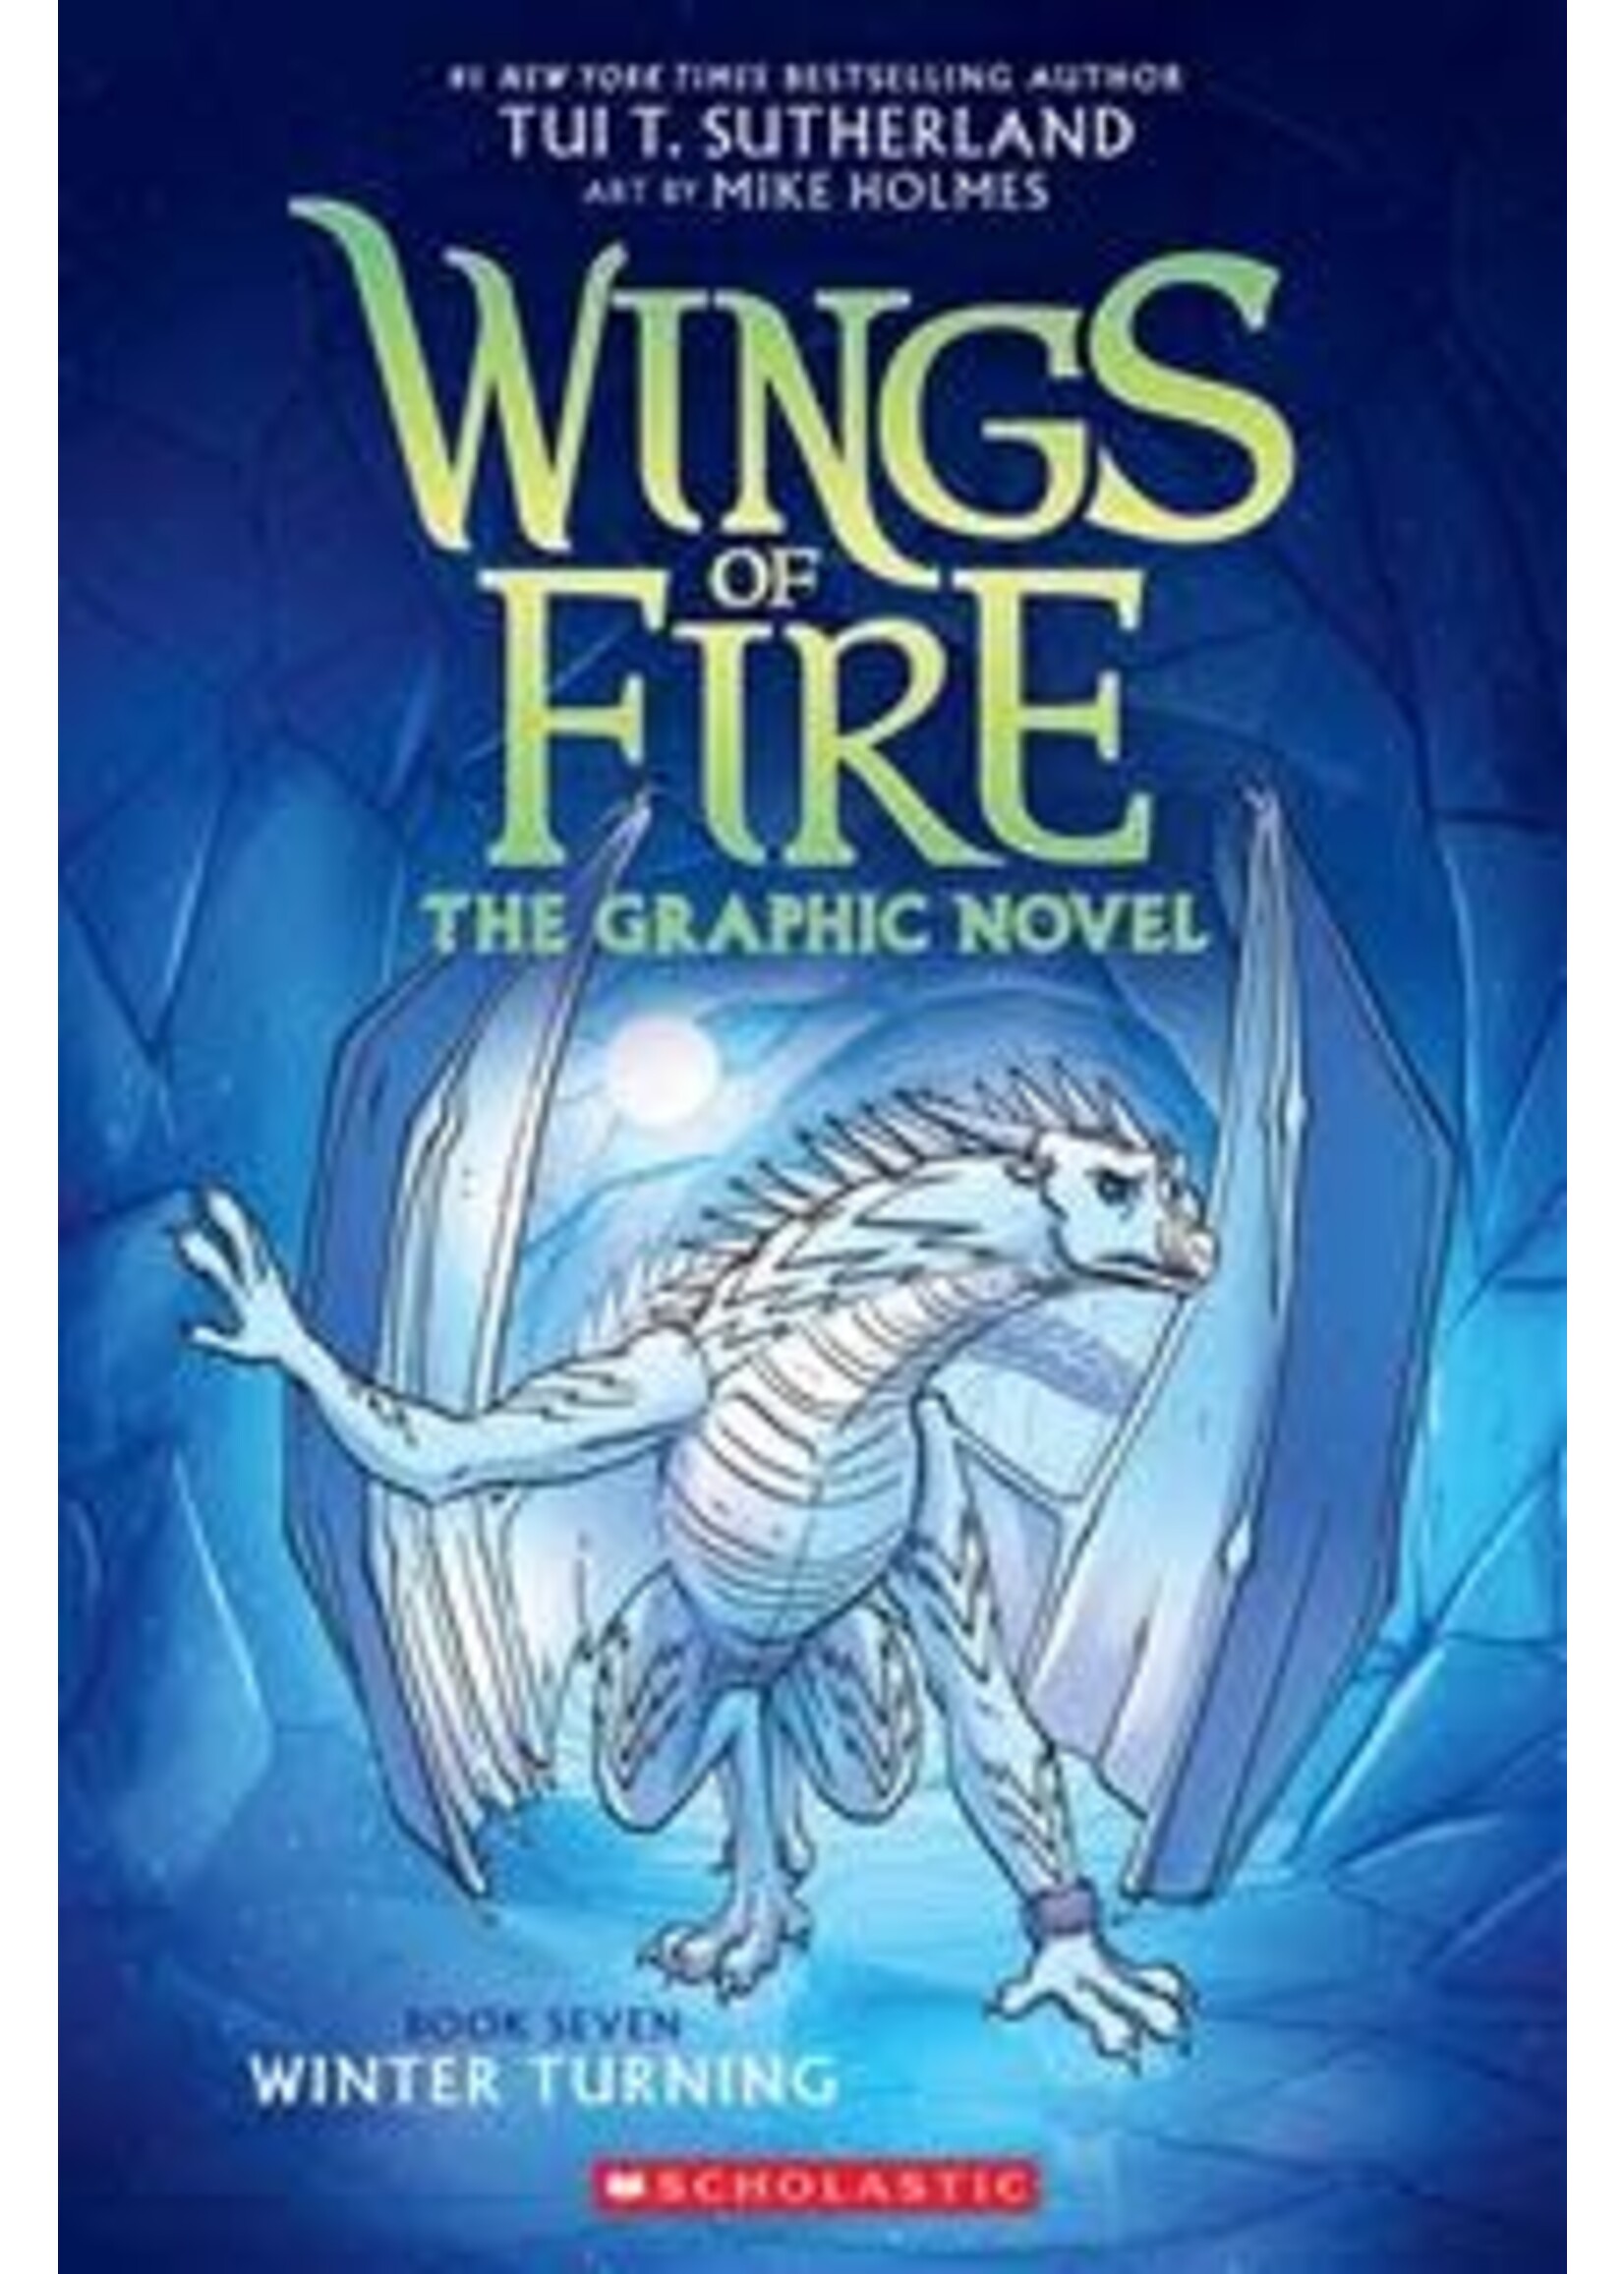 Winter Turning: A Graphic Novel (Wings of Fire Graphic Novel #7) by Tui T. Sutherland, Mike Holmes